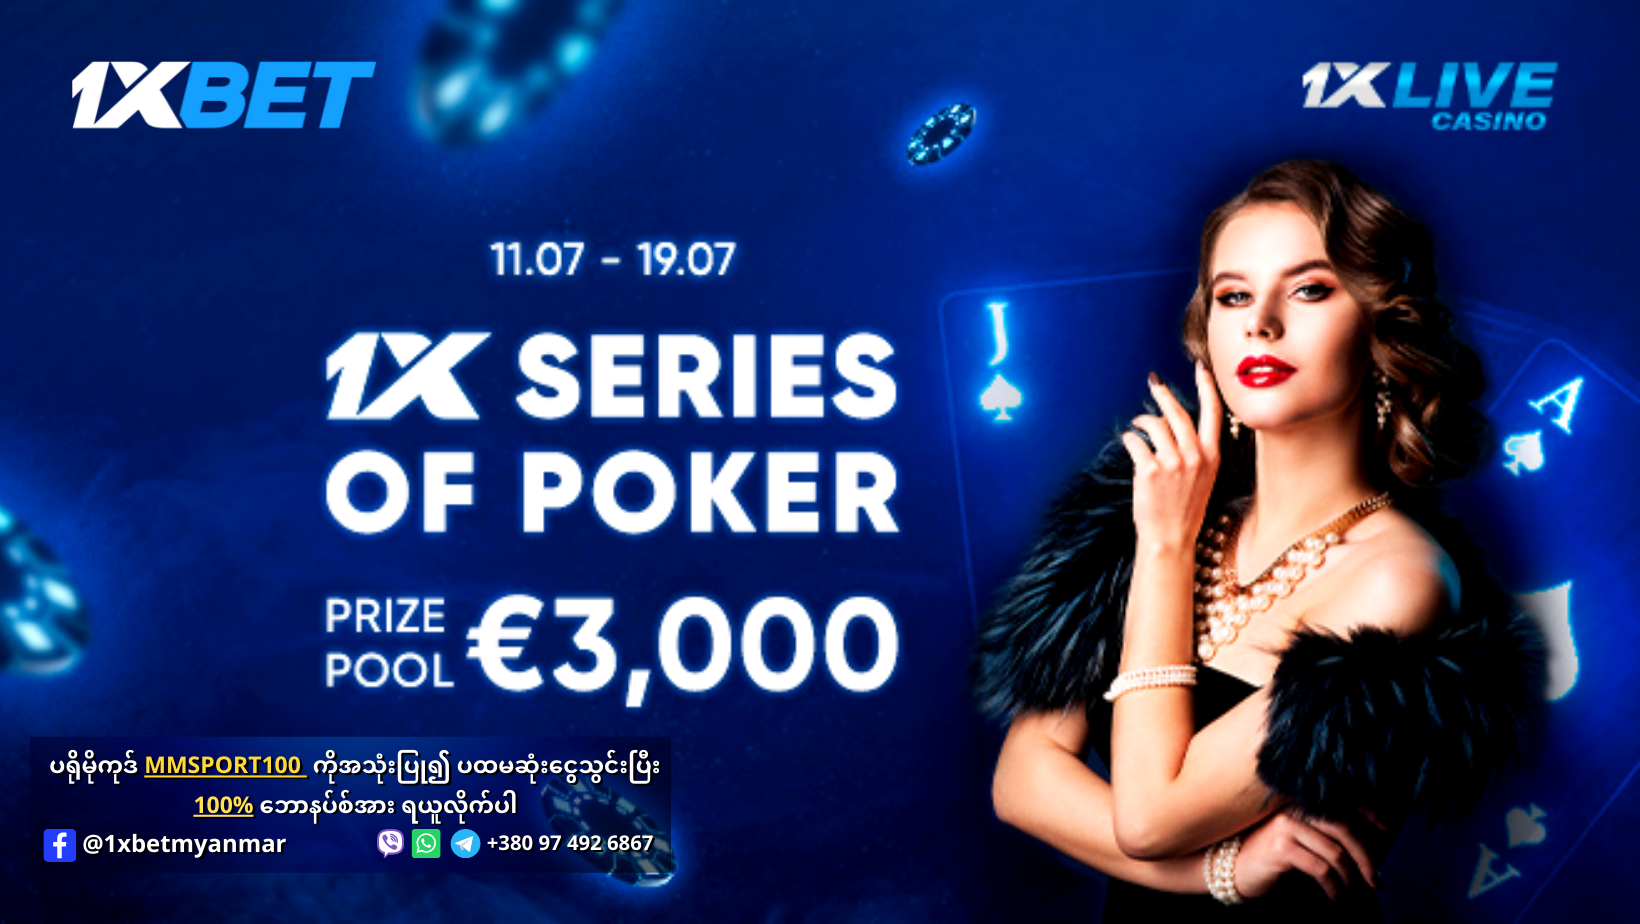 1x Series Of Poker Promotion